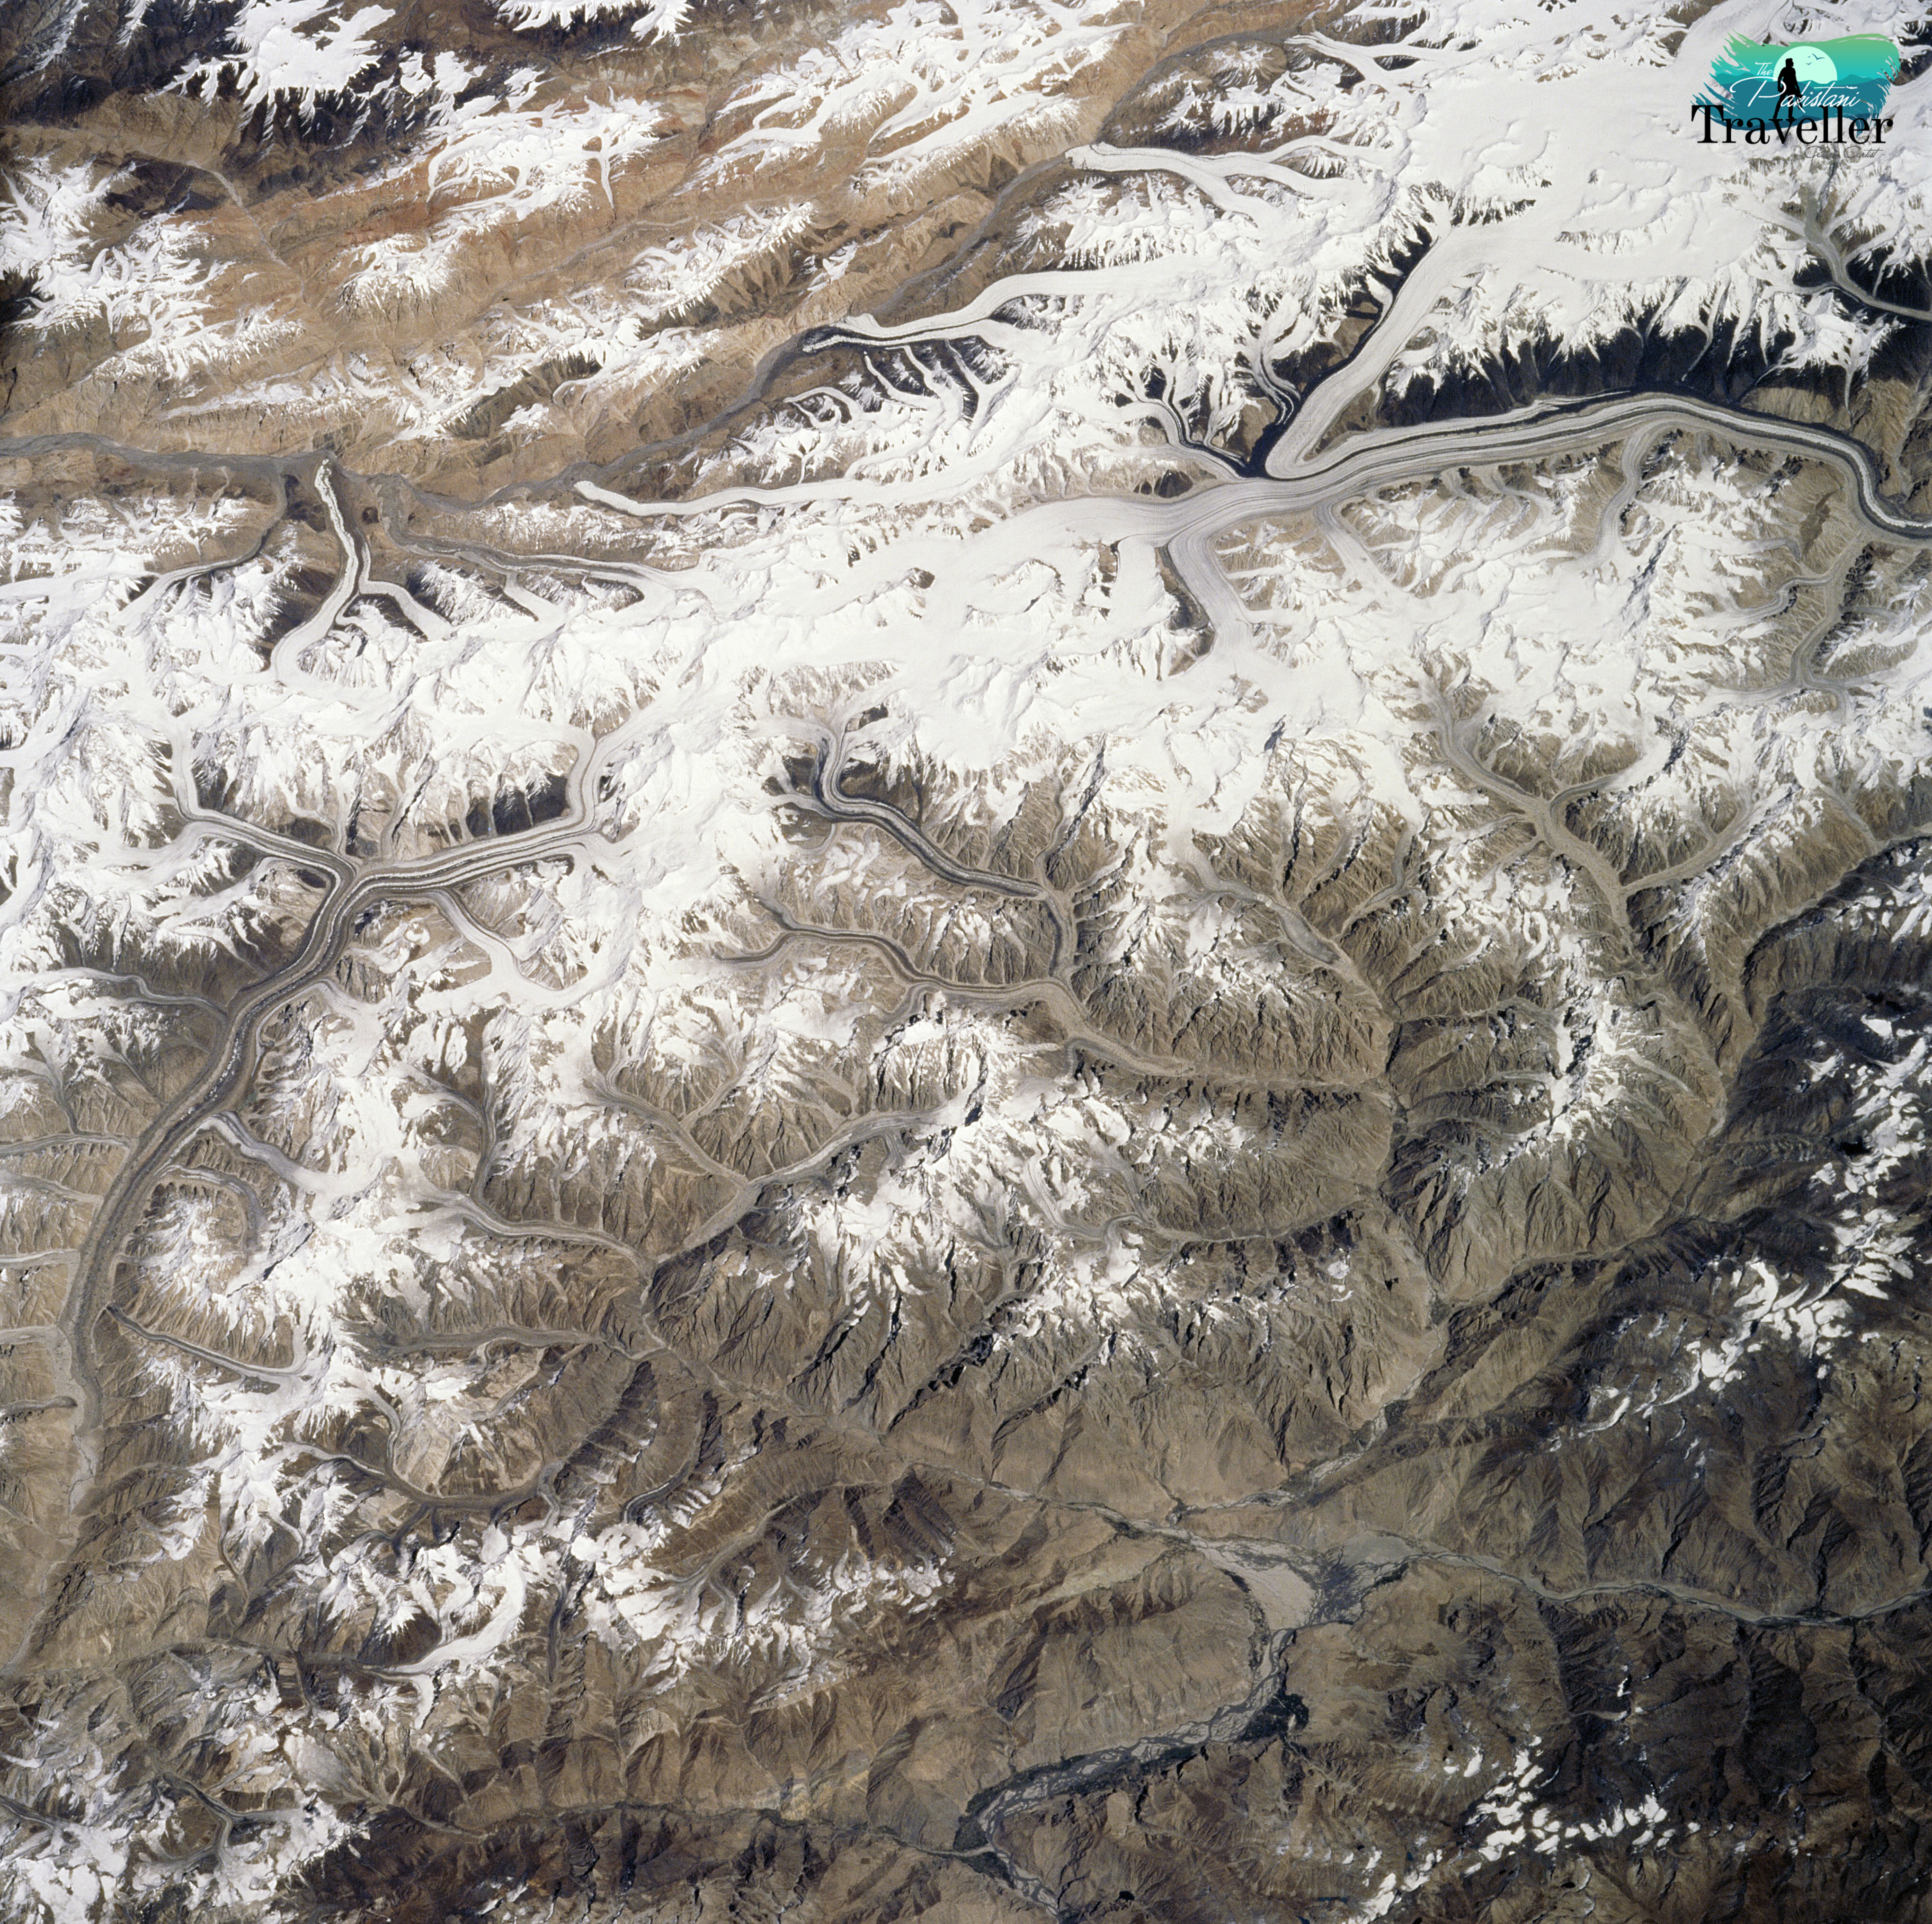 27. Glaciers in the Himalayan Mountains taken from Atlantis during STS-106